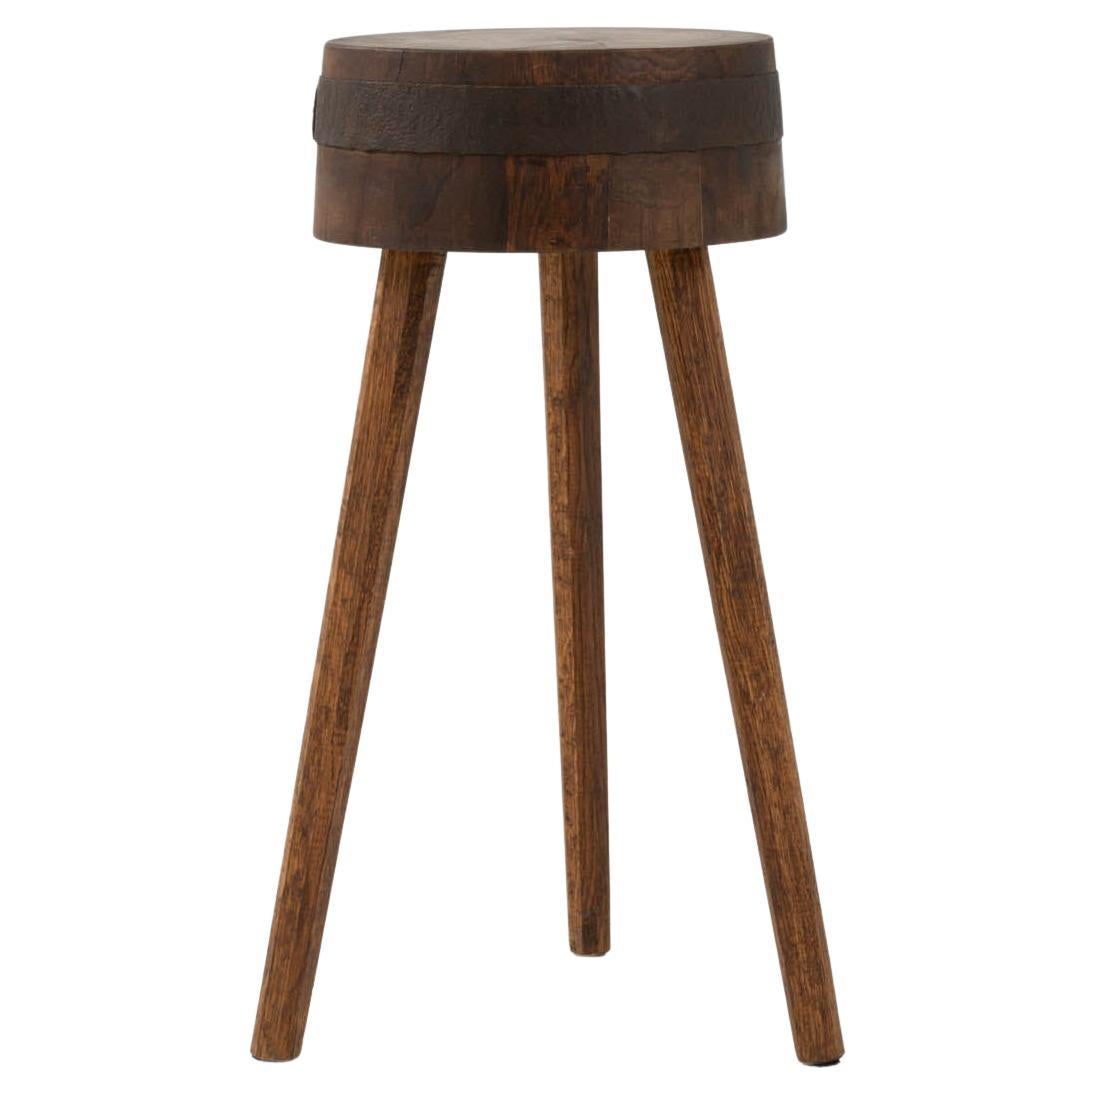 20th Century French Wooden Side Table